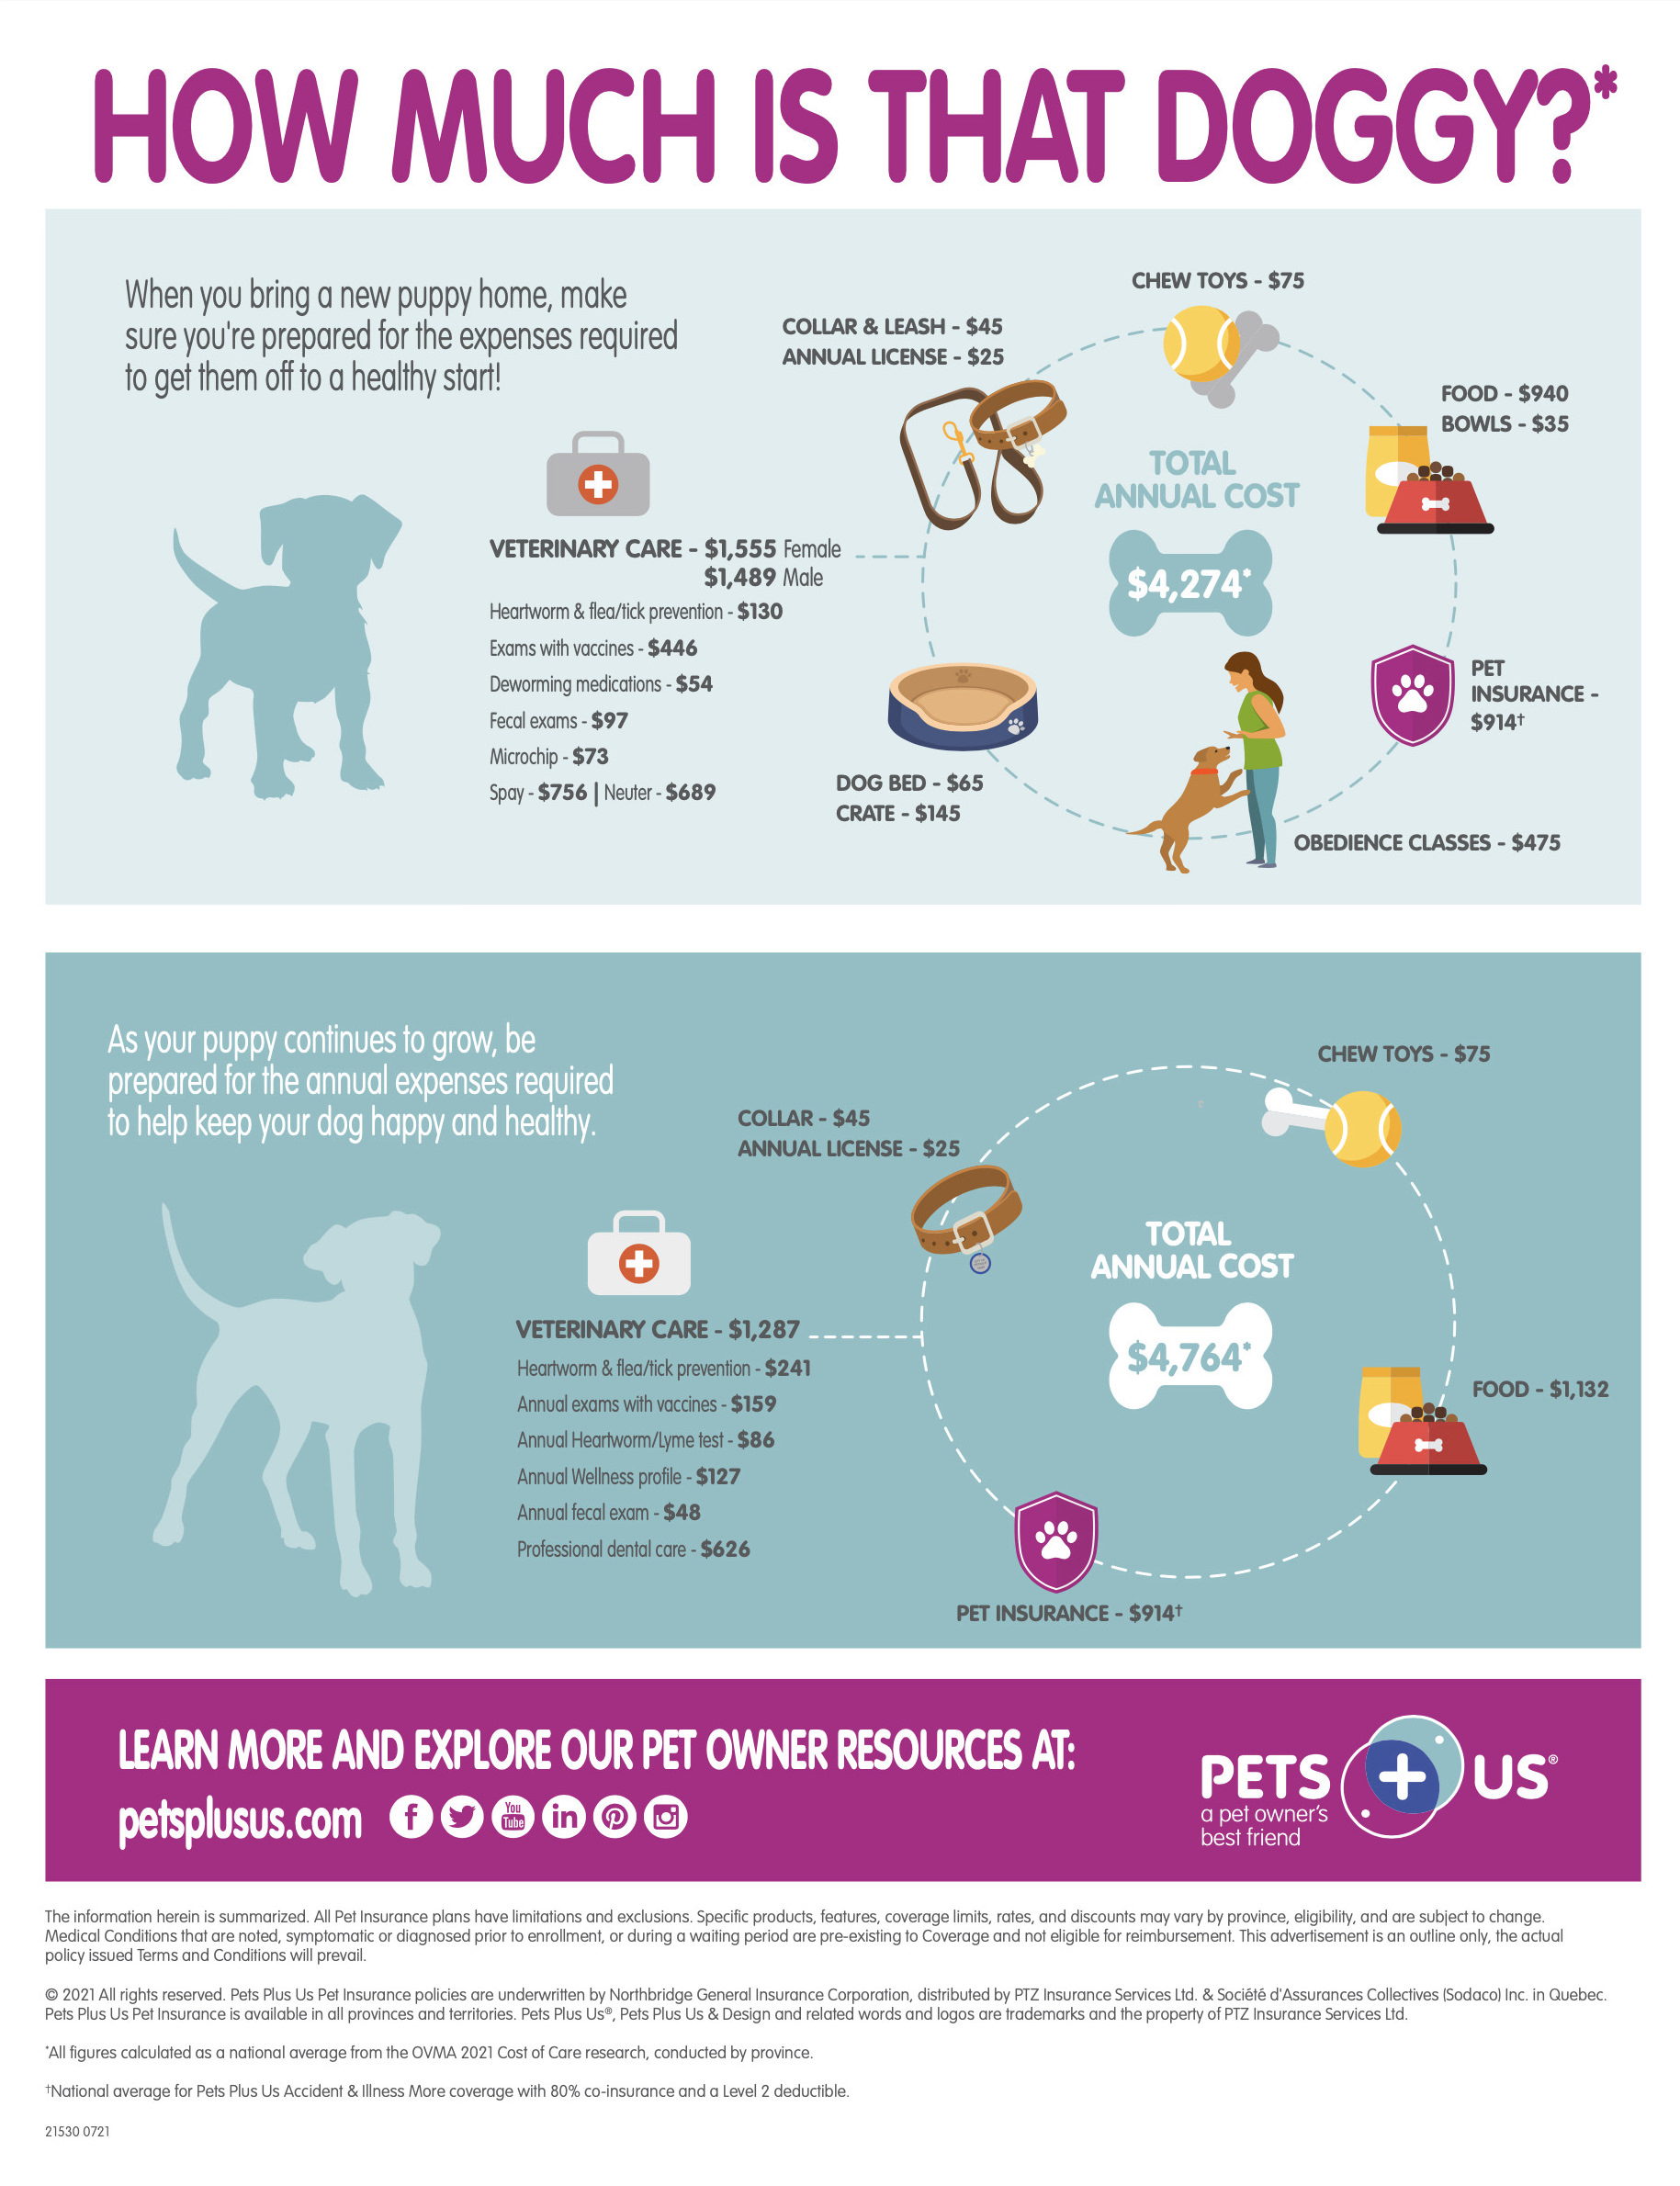 INFOGRAPHIC - How much is that doggy?